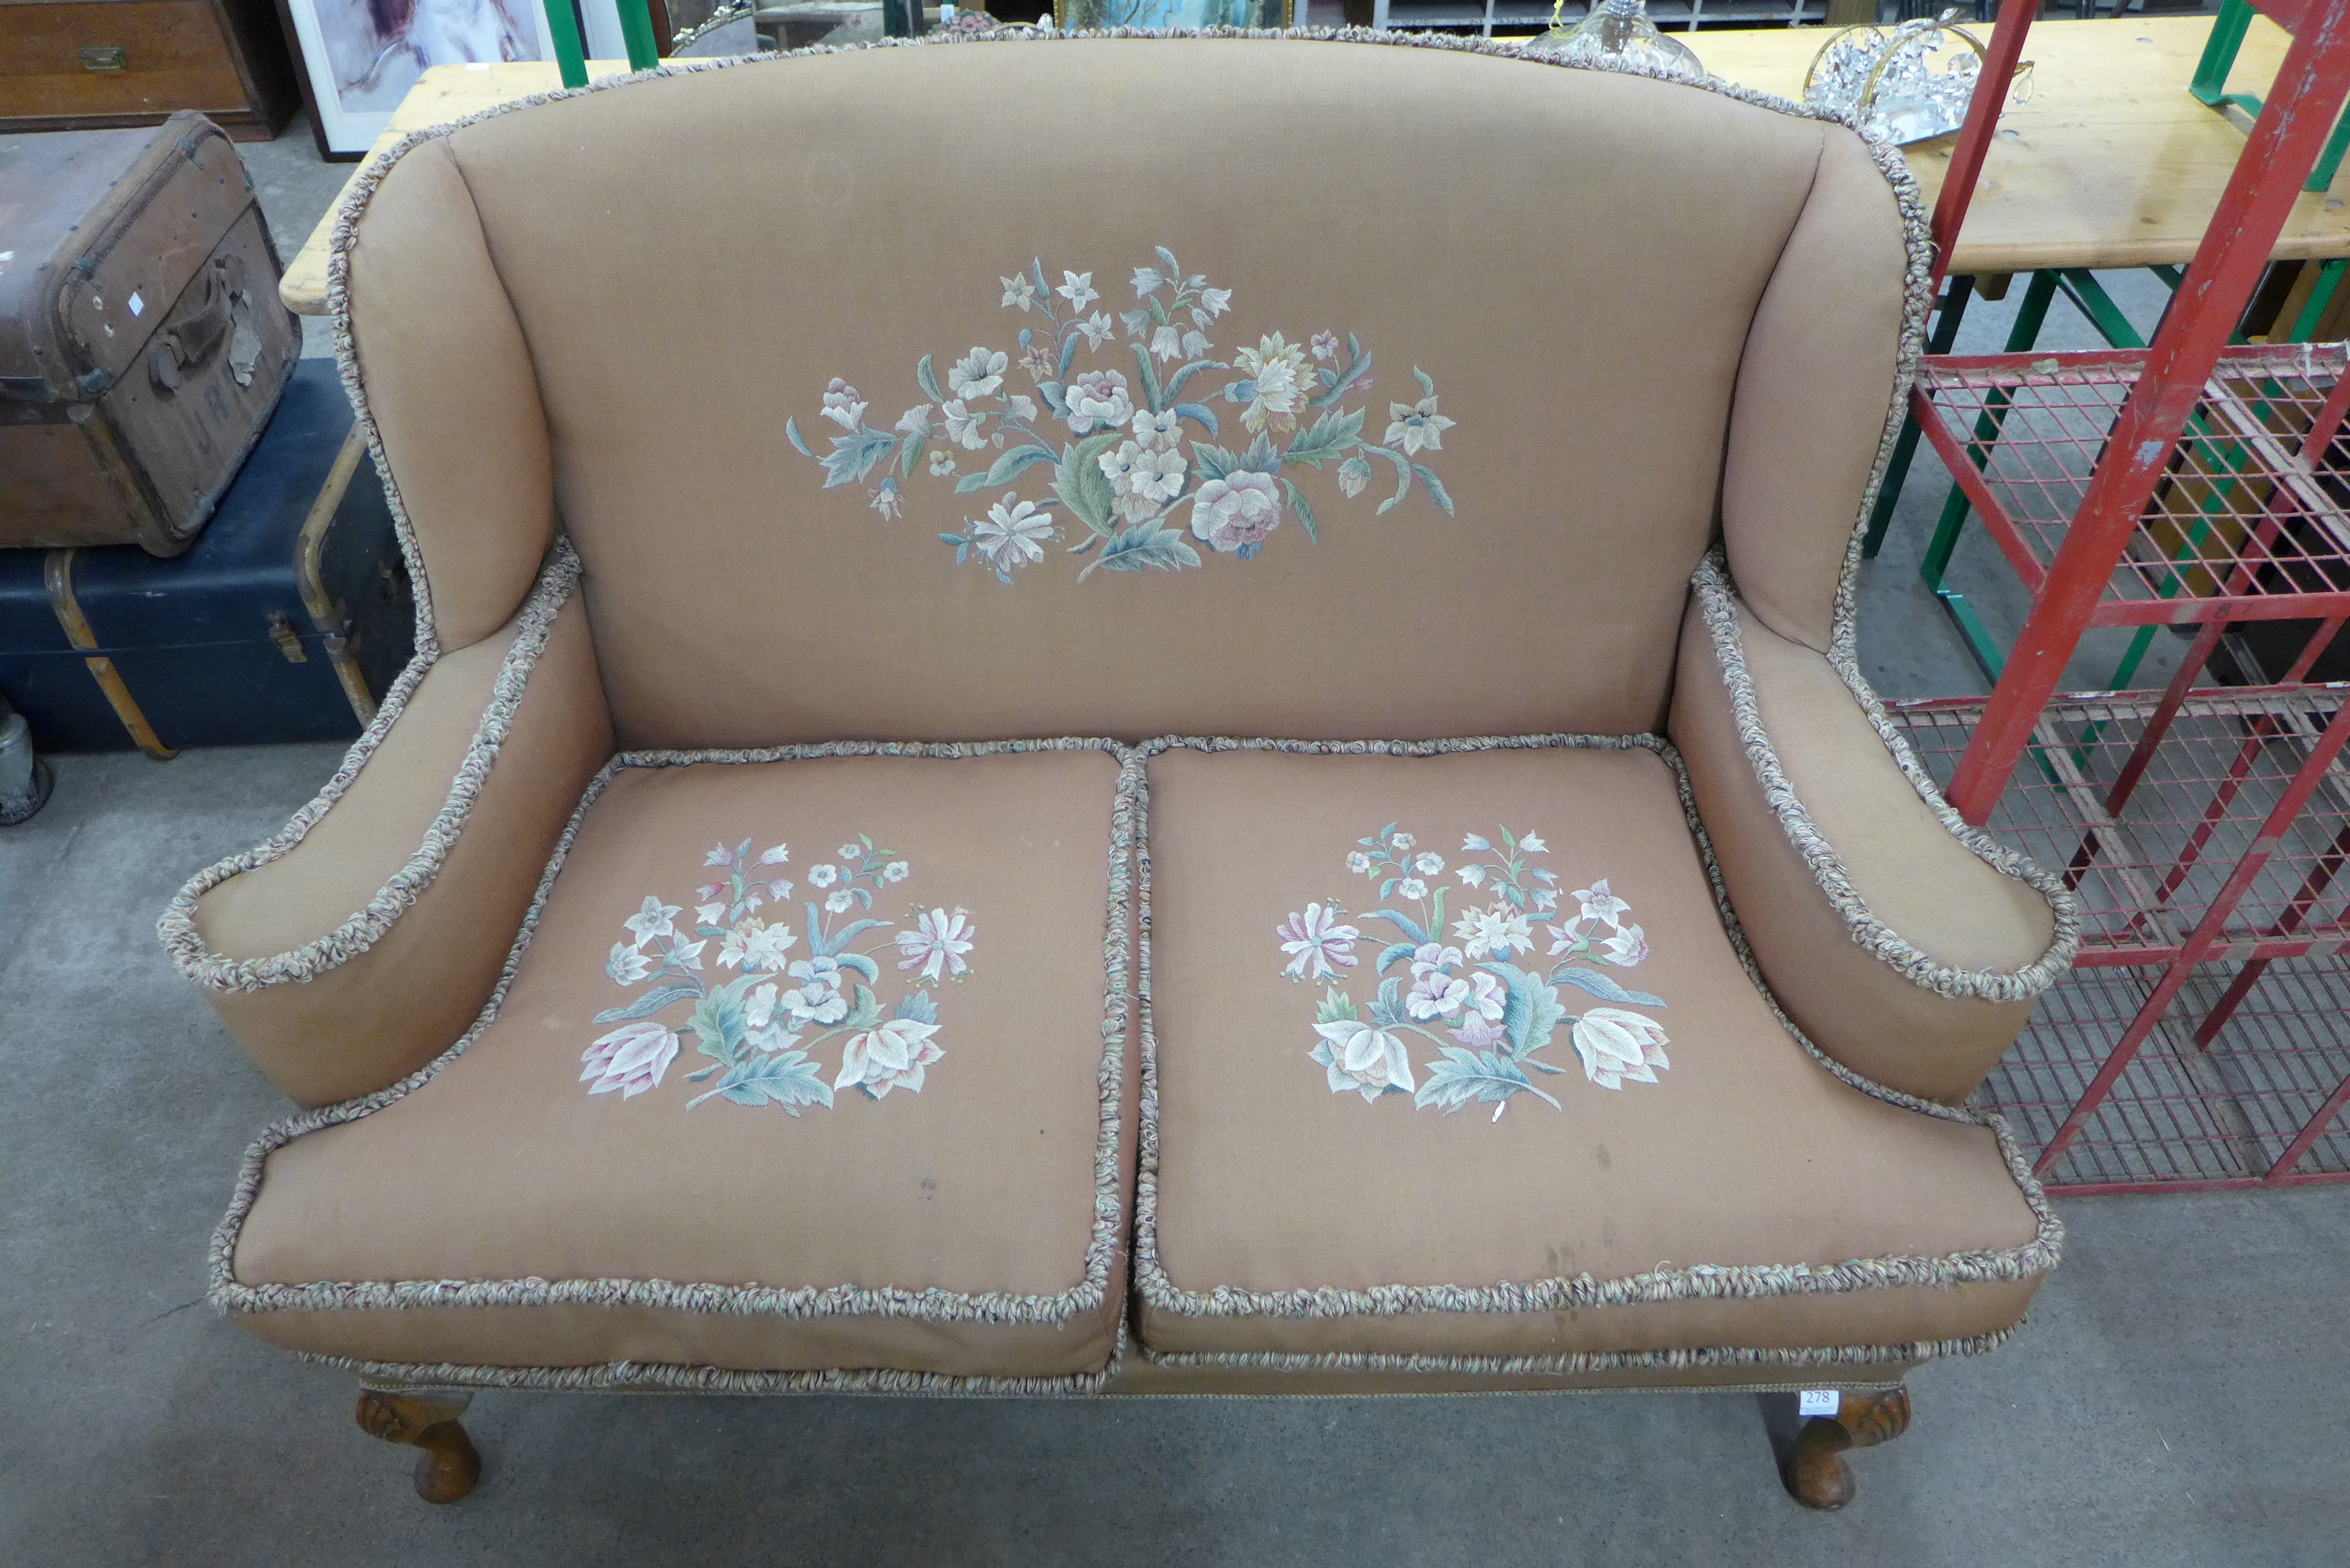 A 1930's upholstered settee